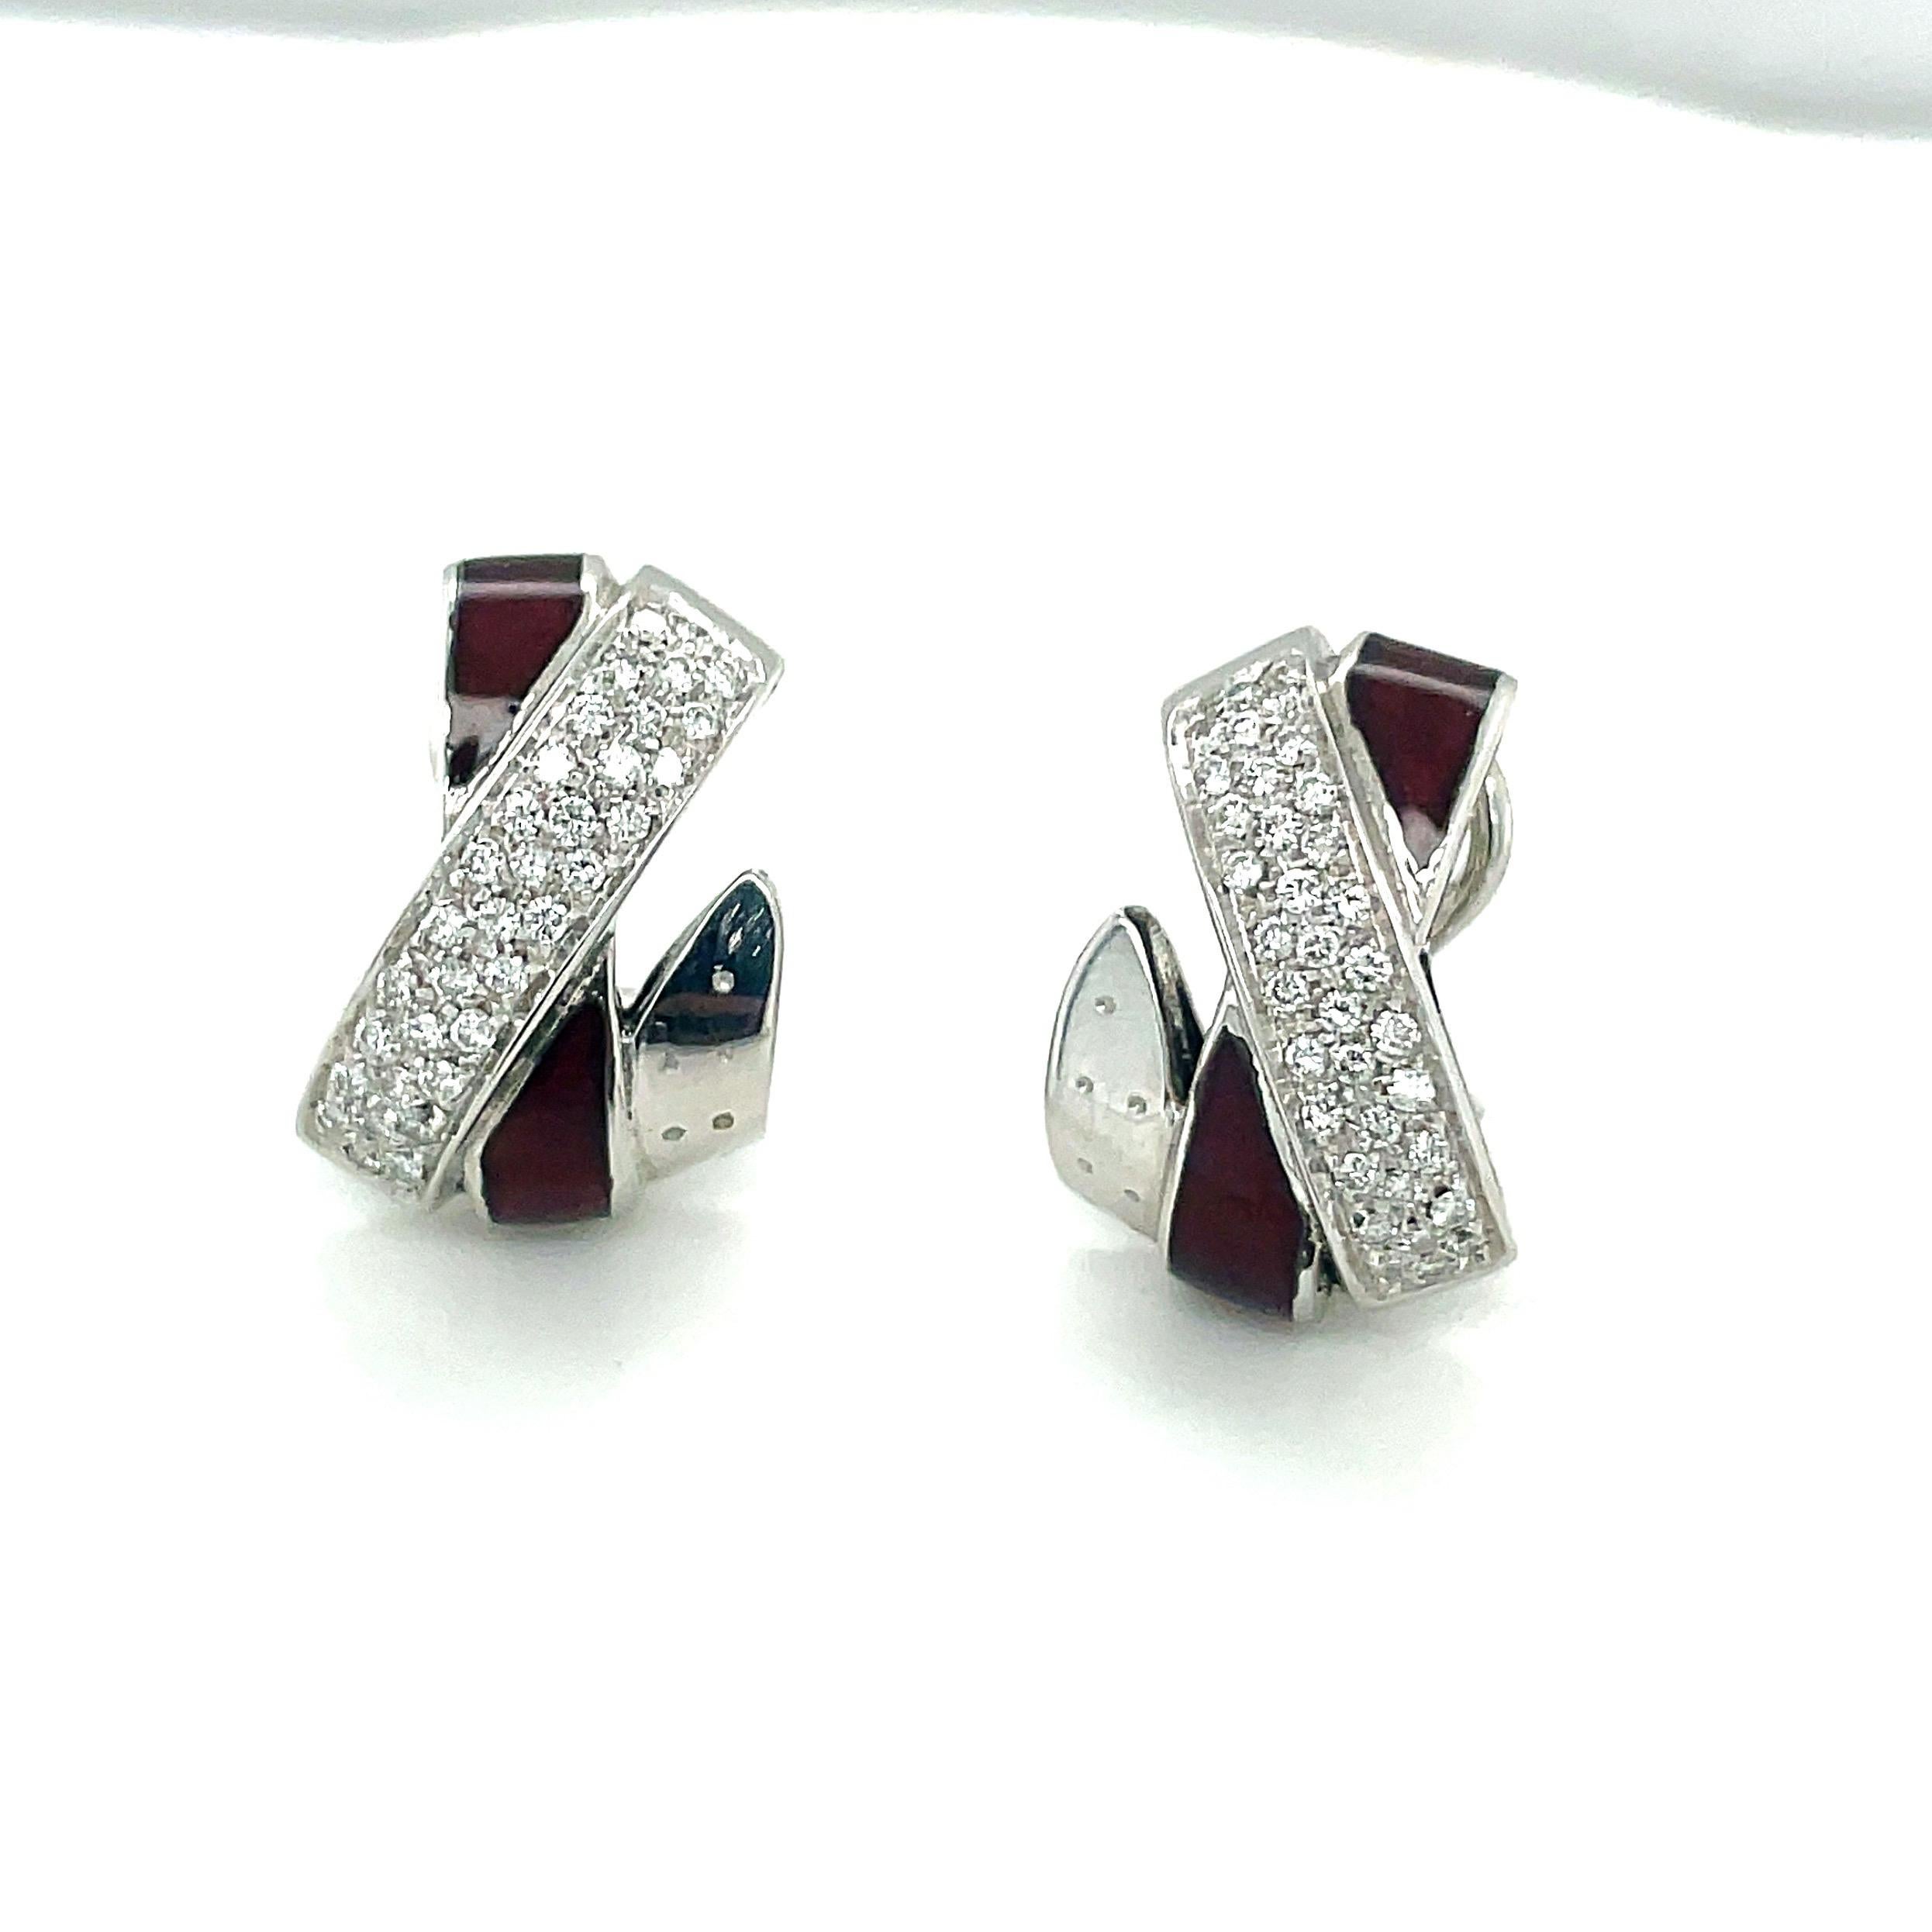 La Nouvelle Bagues 18kt White Gold X Motif Diamond and Enamel Earring In New Condition For Sale In New York, NY